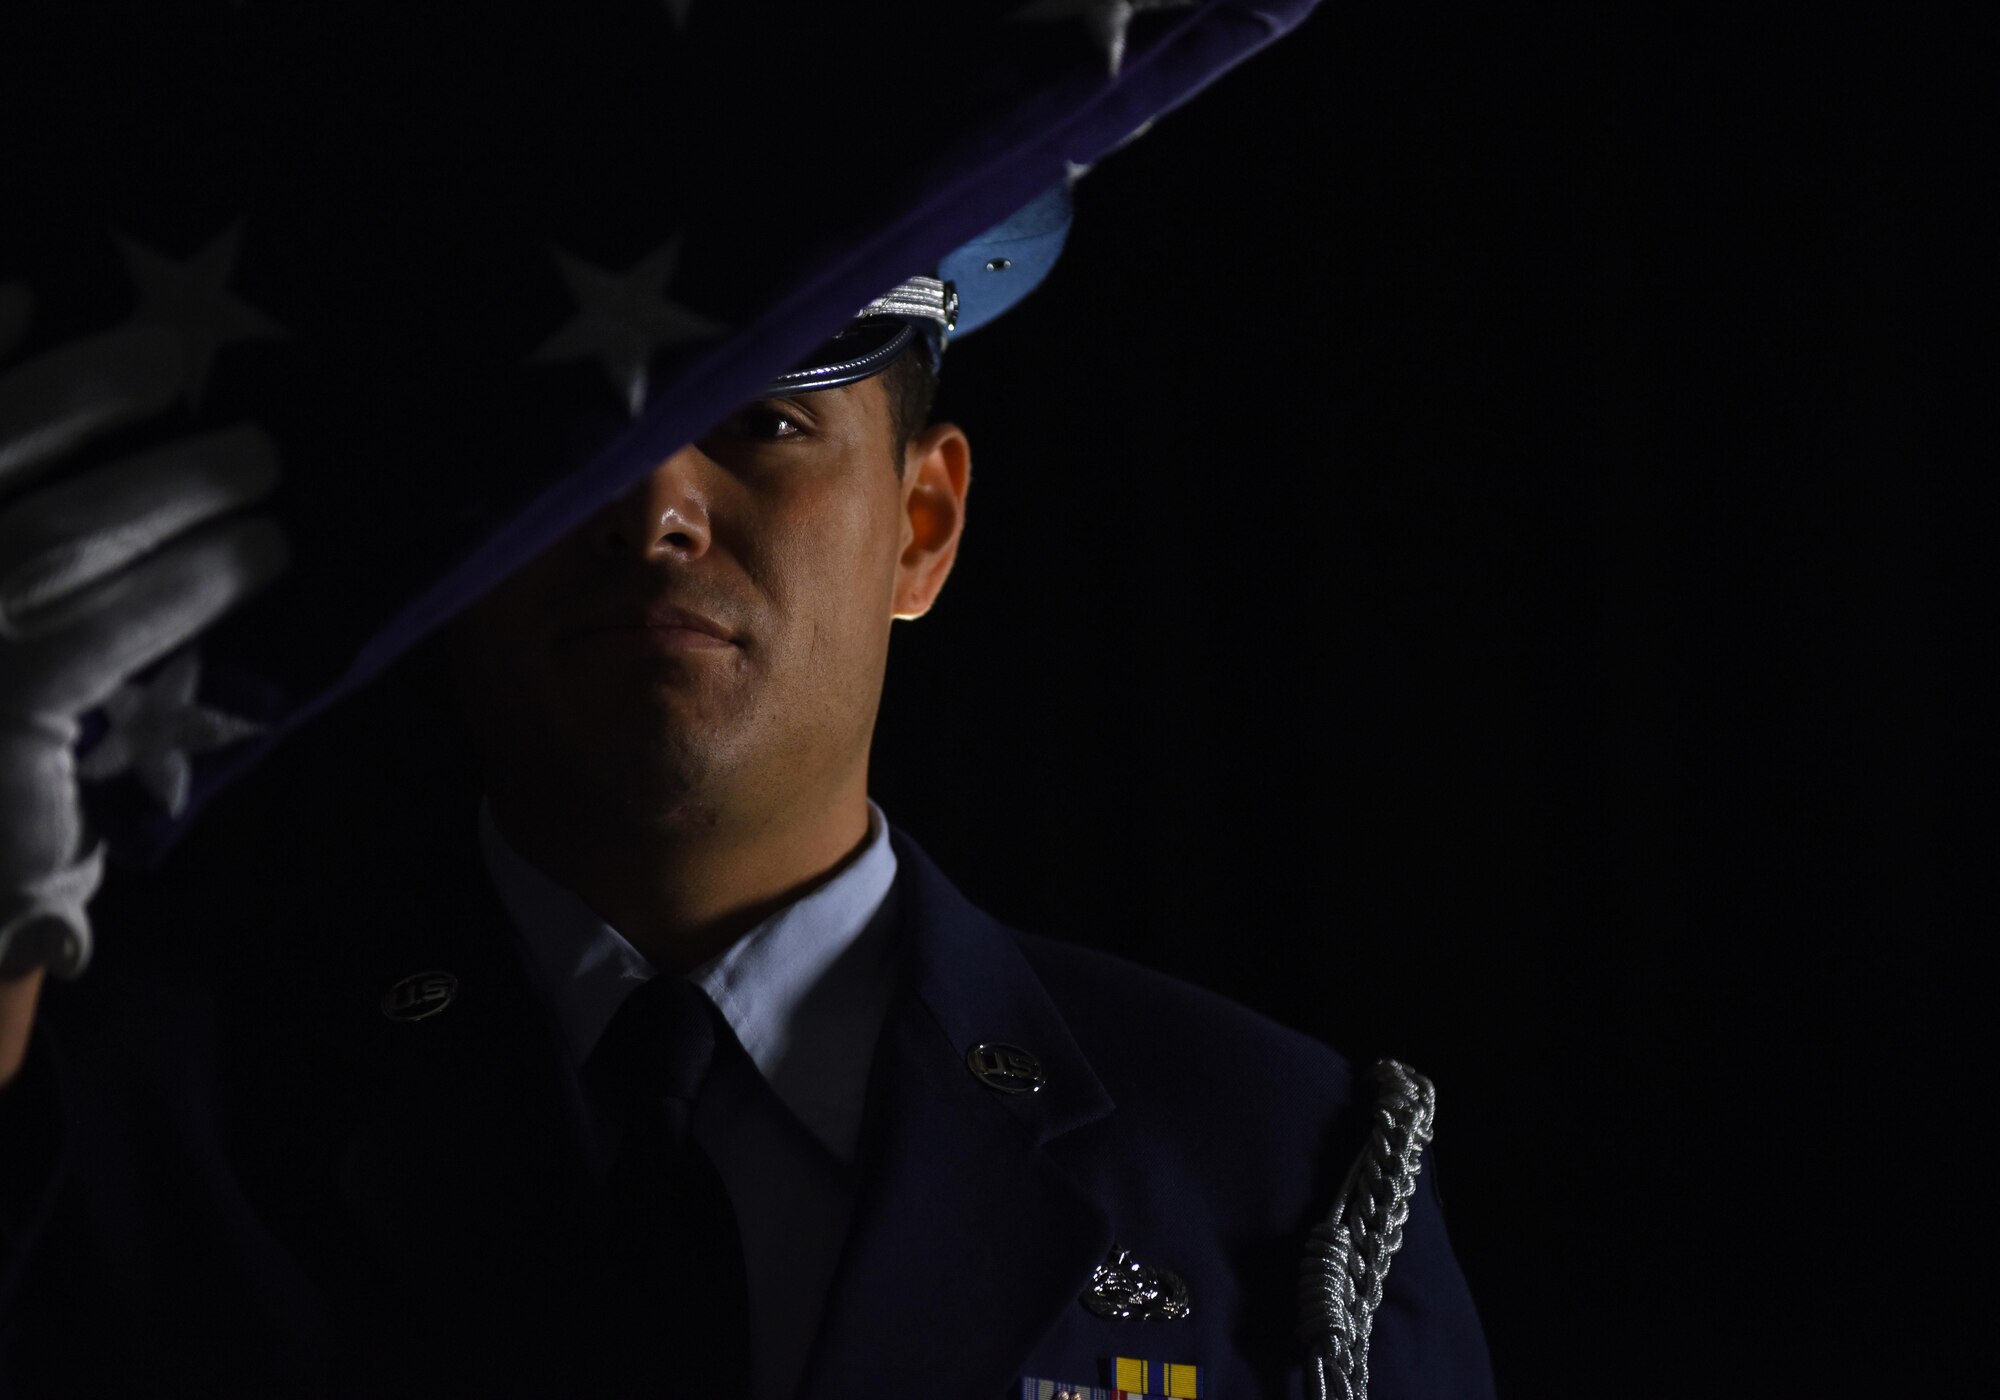 Staff Sgt. Anthony O’Conner-Geiling, 81st Training Wing honor guardsman, holds a folded U.S. flag Nov. 28, 2016, on Keesler Air Force Base, Miss. O’Conner-Geiling has spent five years on base honor guard units at Hill AFB, Utah, and Keesler, performing the duties of a ceremonial guardsman. He has participated in more than 280 details over a combined 213,000 square miles, covering two-thirds of Utah, southern Idaho, eastern Nevada, western Wyoming, southern Mississippi and southern Louisiana. (U.S. Air Force photo by Senior Airman Holly Mansfield)